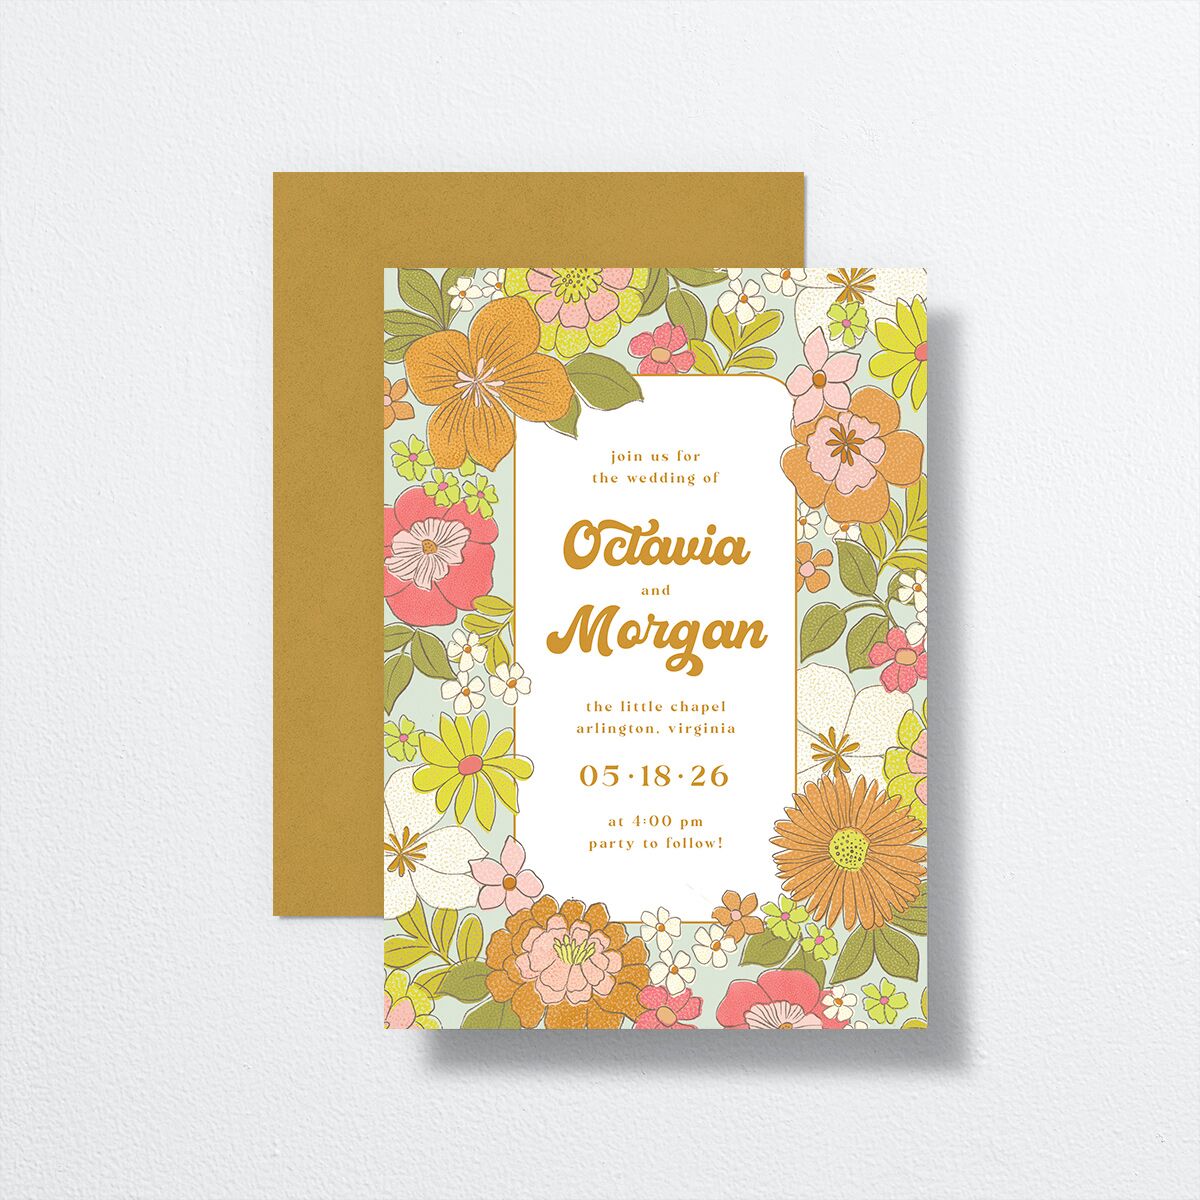 Groovy Blooms Wedding Invitations front-and-back in yellow